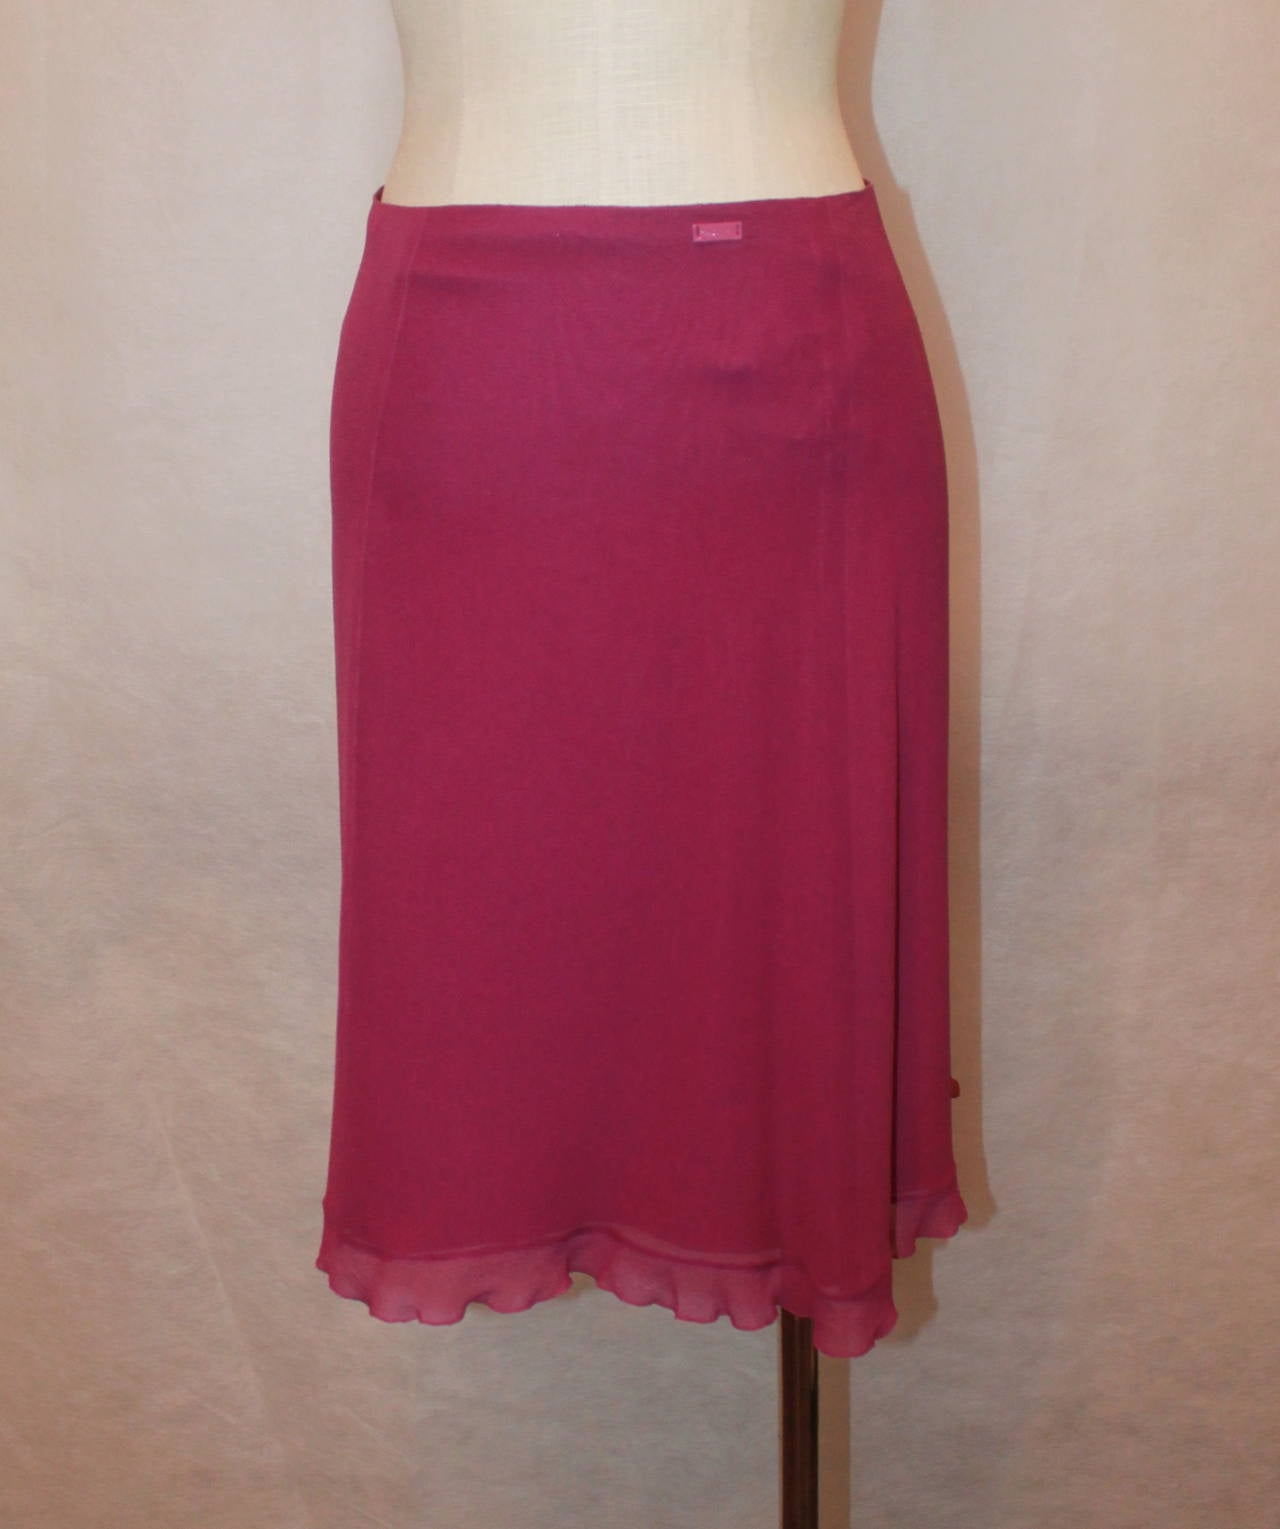 Chanel 2001 Raspberry Silk Chiffon Skirt with Bottom Ruffle - 38. This skirt is in very good condition with 1 small pull in the back top. 

Waist- 29